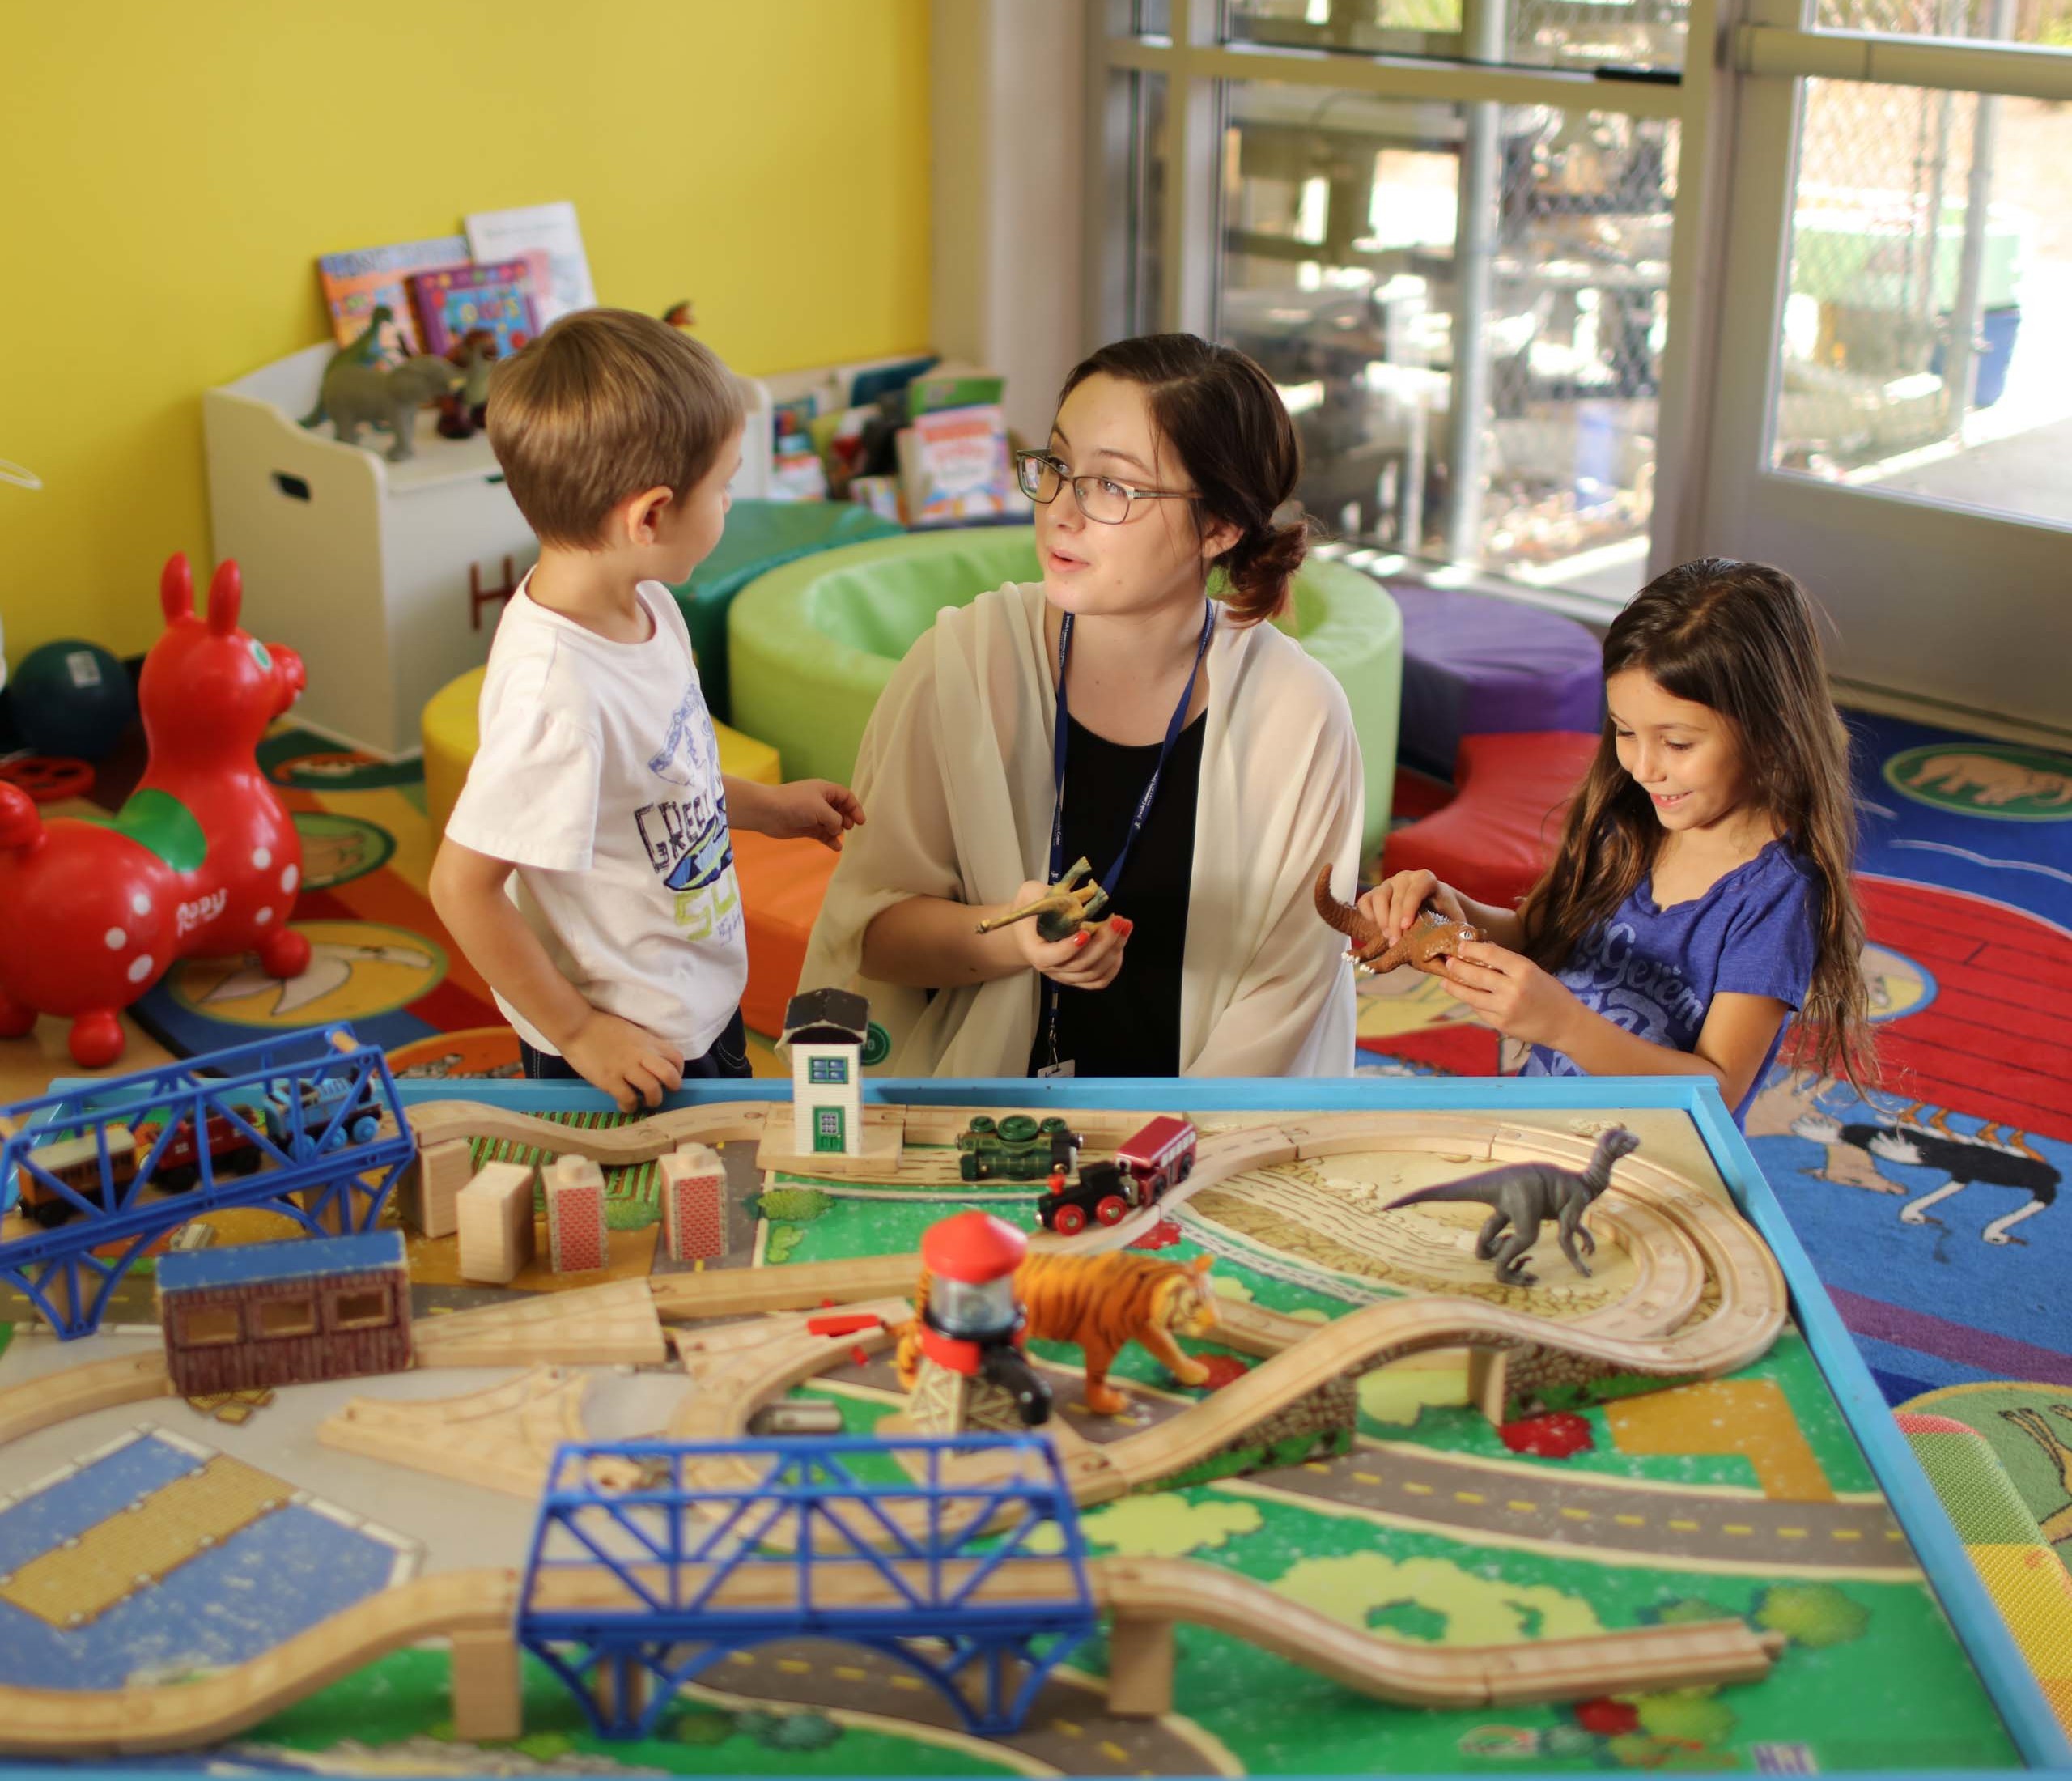 Two kids playing with toys alongside an adult.